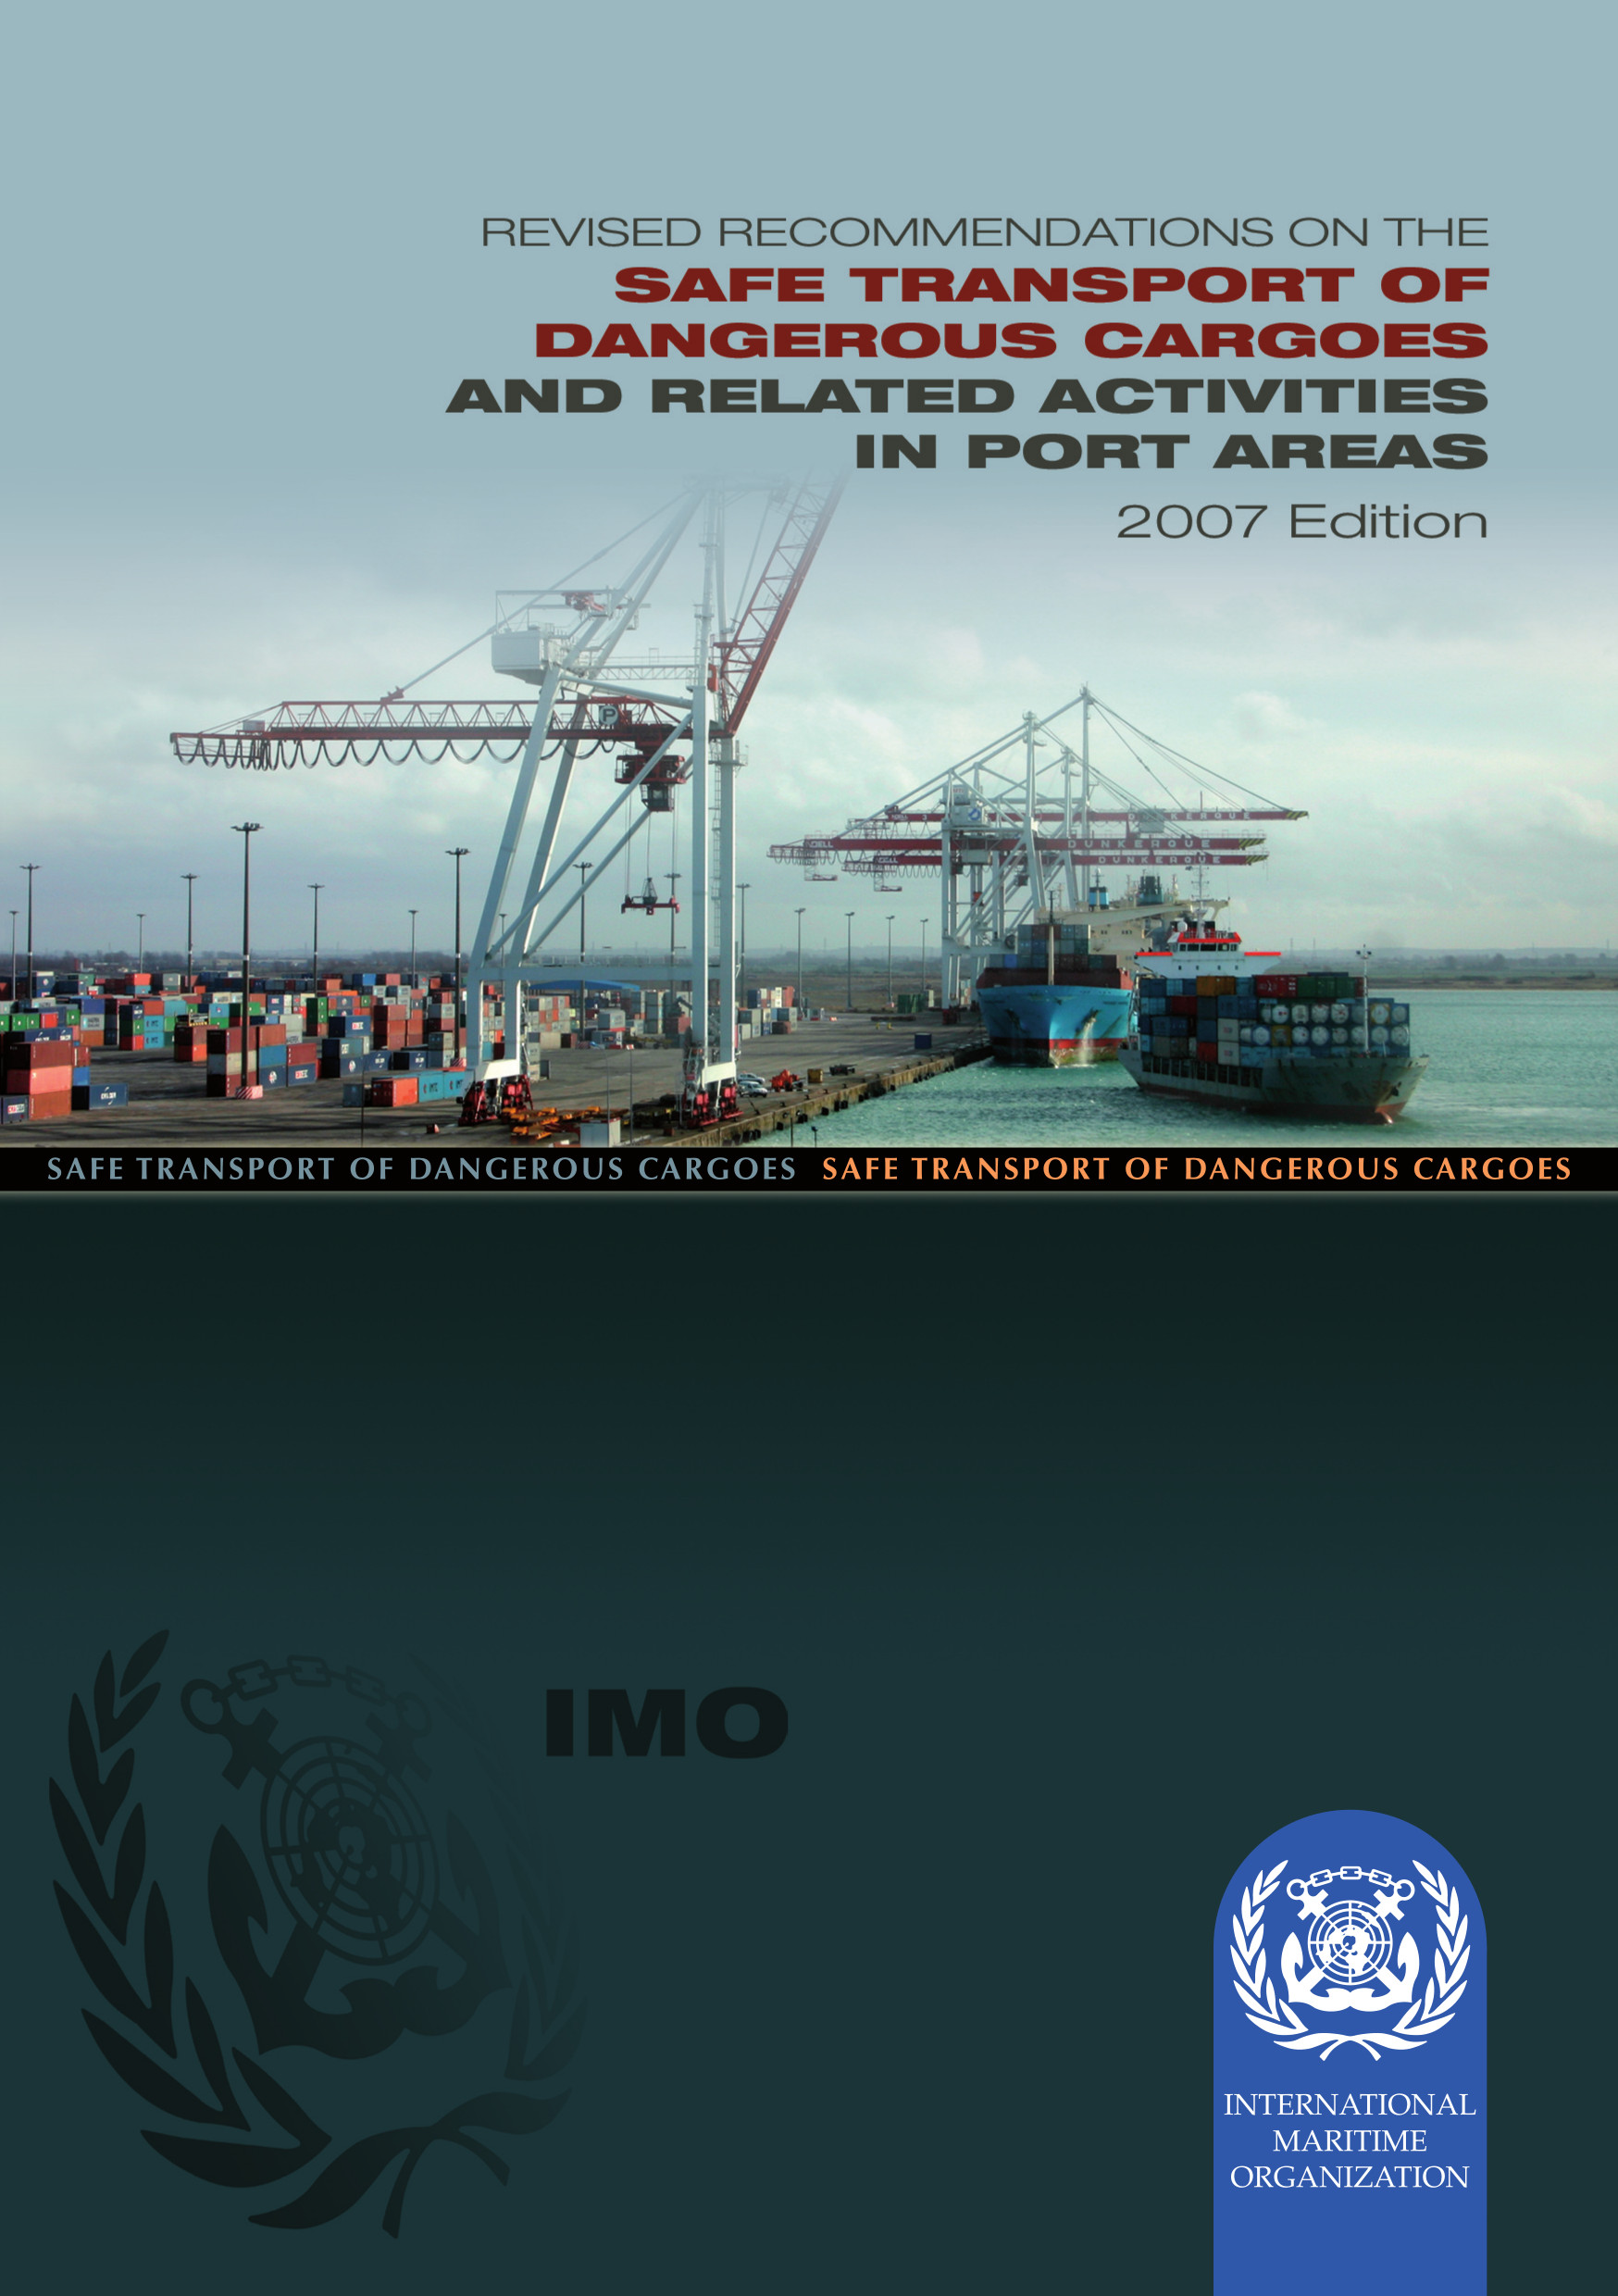 Revised Recommendations on the Safe Transport of Dangerous Cargoes and Related Activities in Port Areas